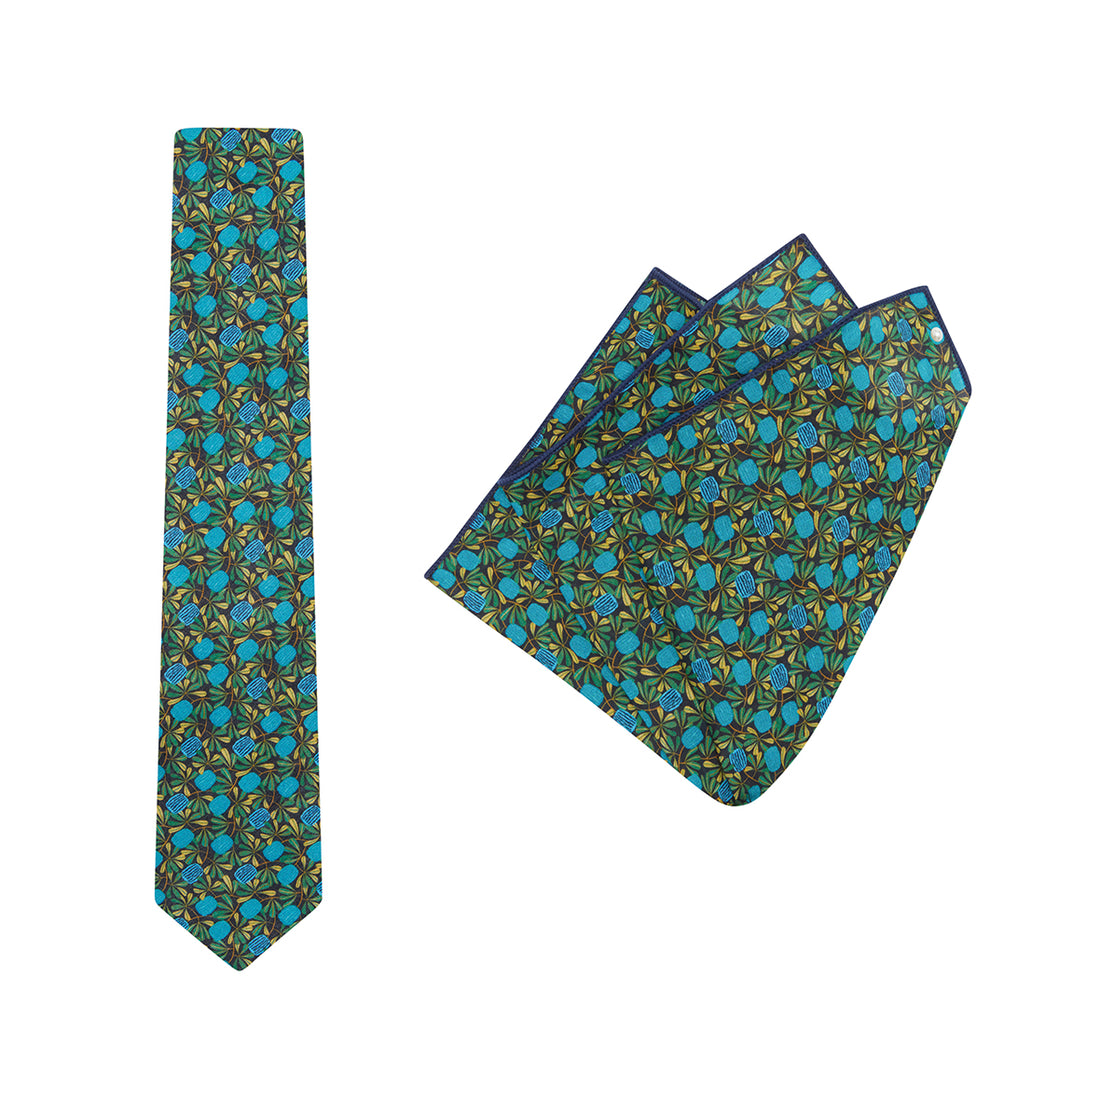 TIE + POCKET SQUARE SET. Jocelyn Proust Coastal Banksia Print. Navy/Aqua. Supplied with matching pocket square.-Ties-PEROZ Accessories